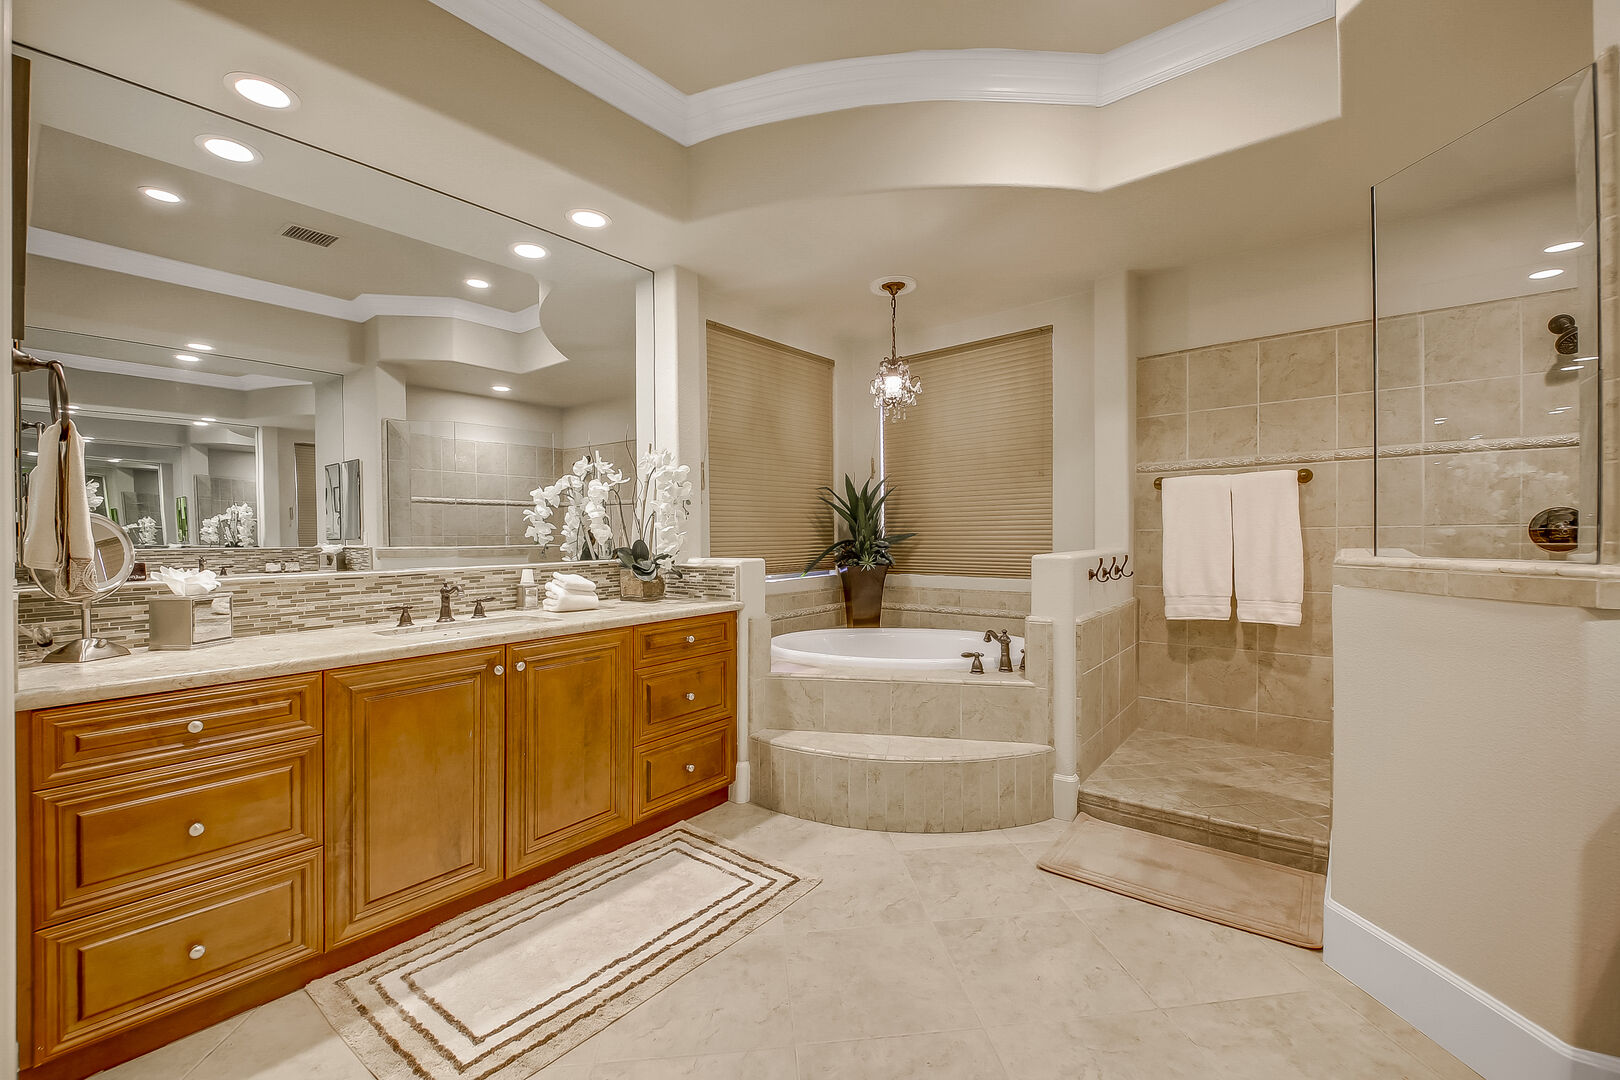 The private en suite bathroom features a soaking tub, tile shower and his and her vanity sinks.